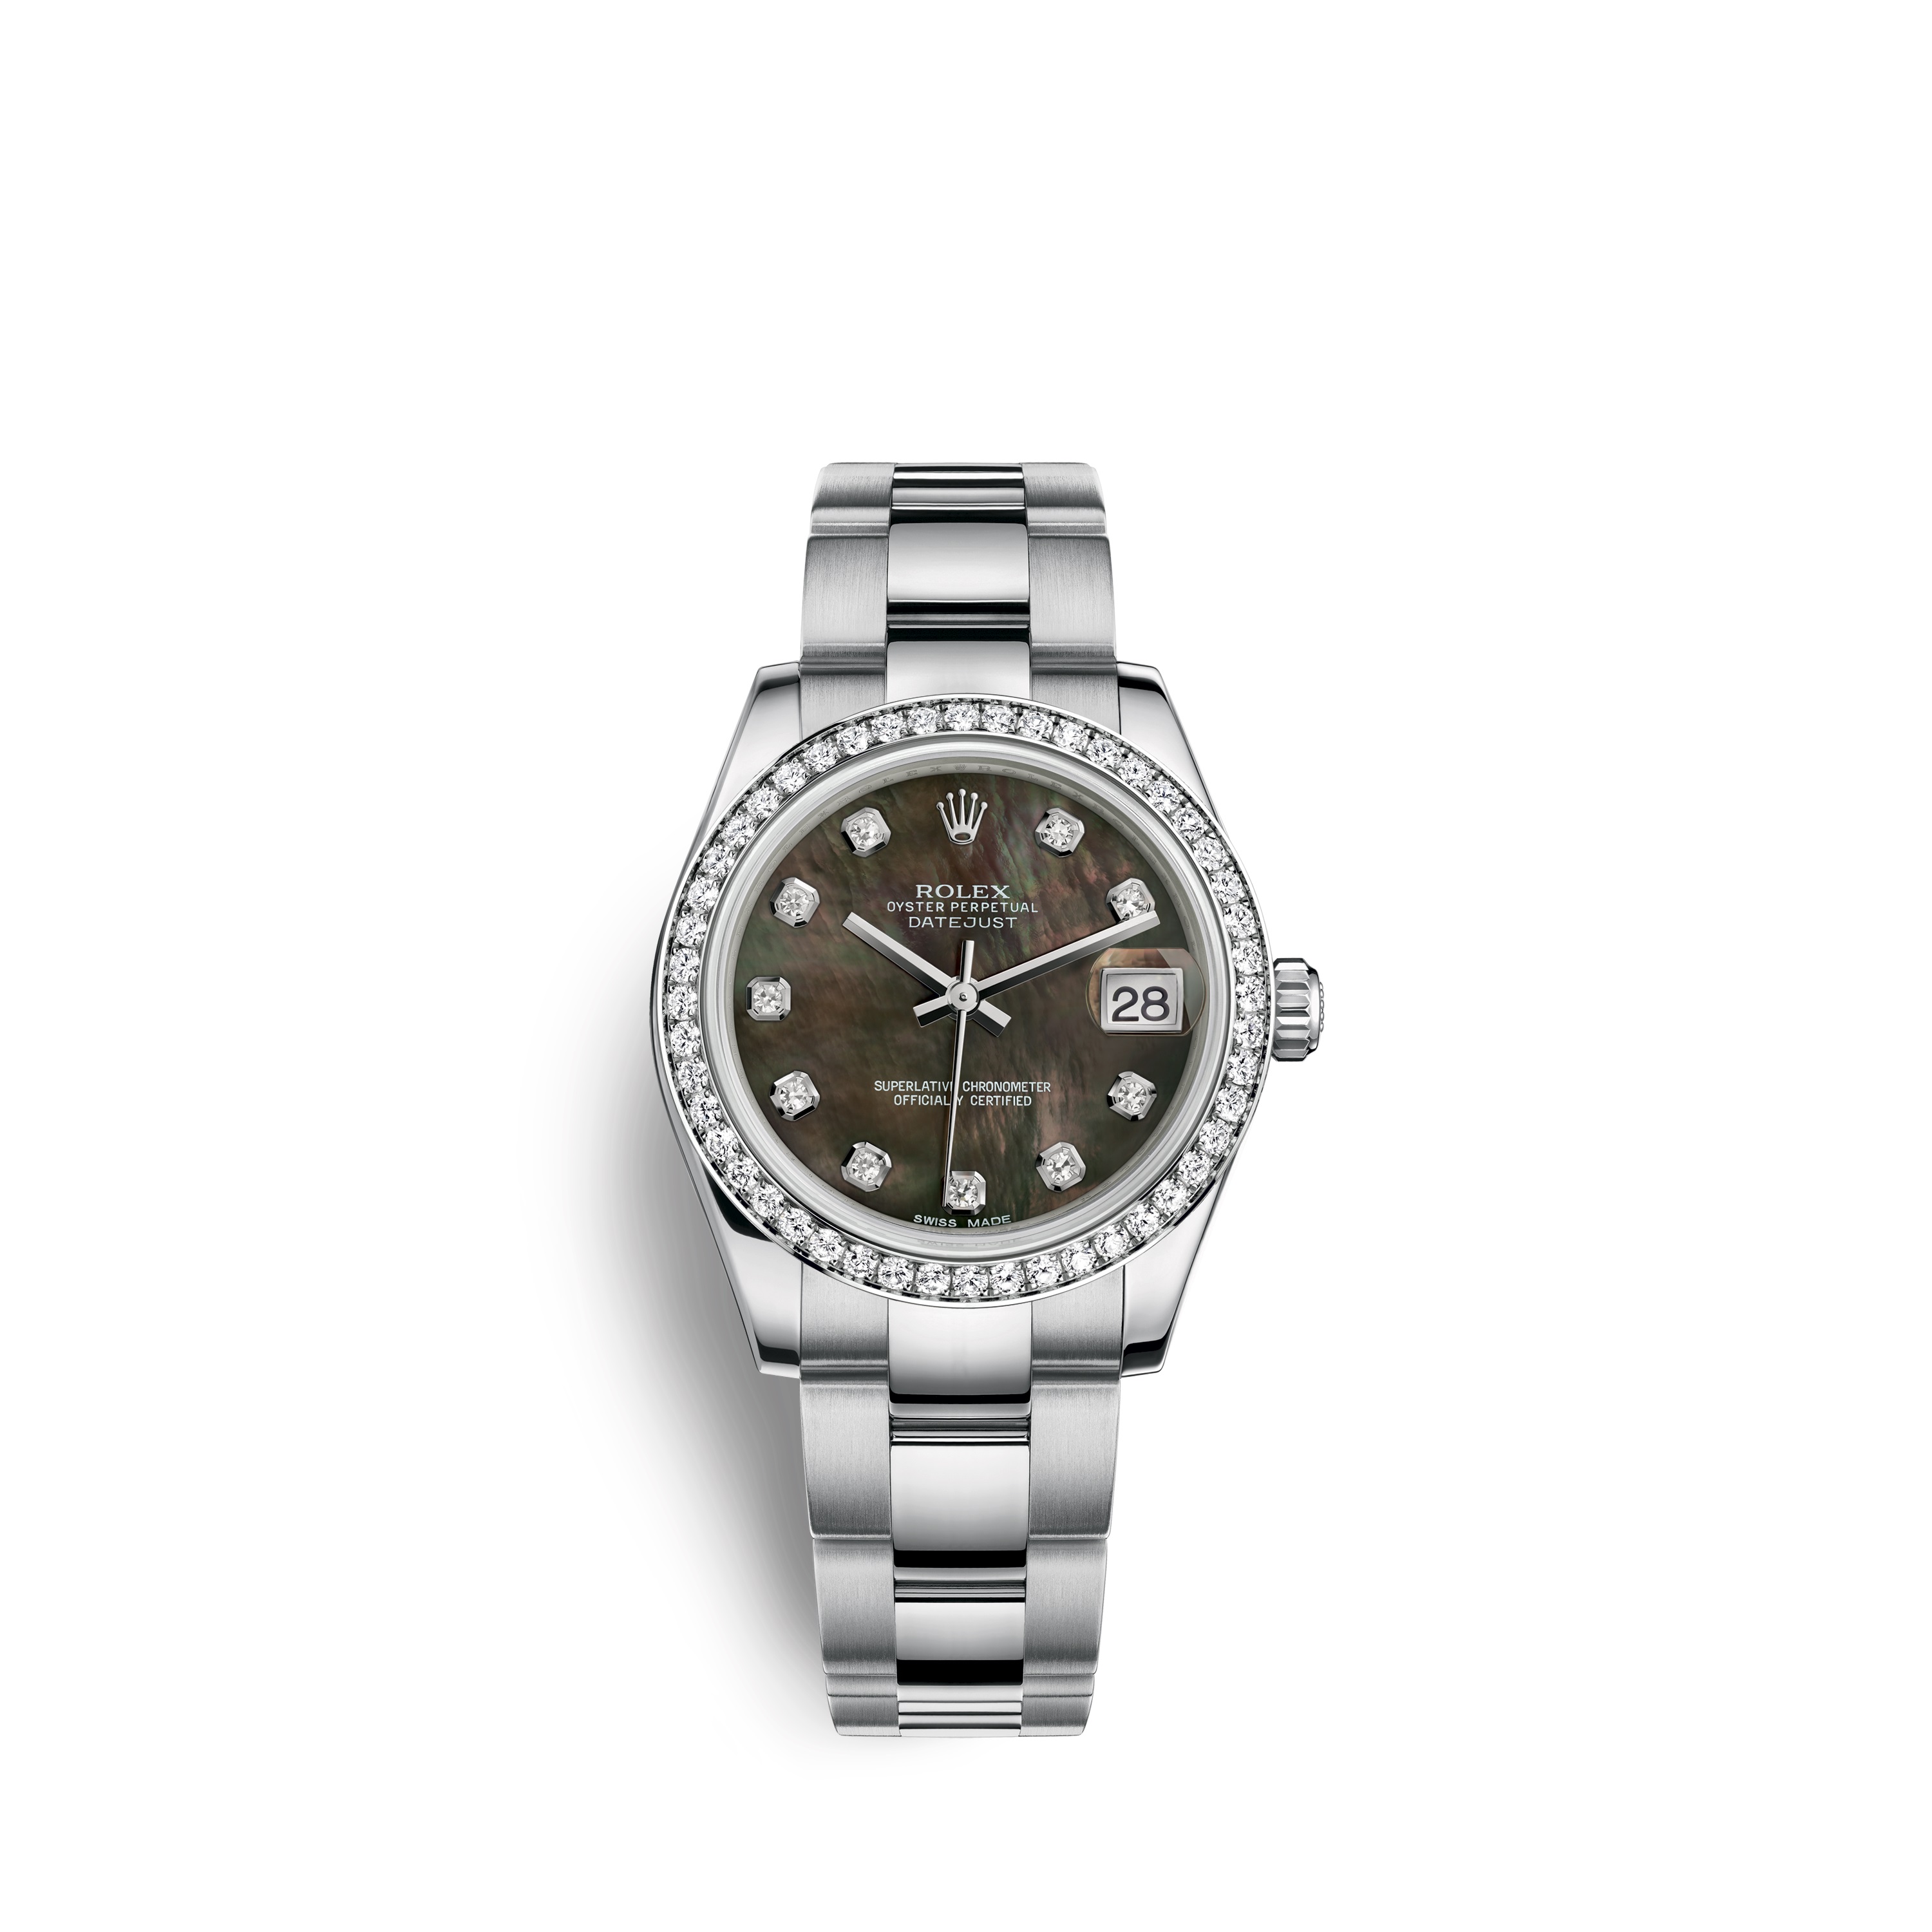 Datejust 31 178384 White Gold & Diamonds Watch (Black Mother-of-Pearl Set with Diamonds) - Click Image to Close